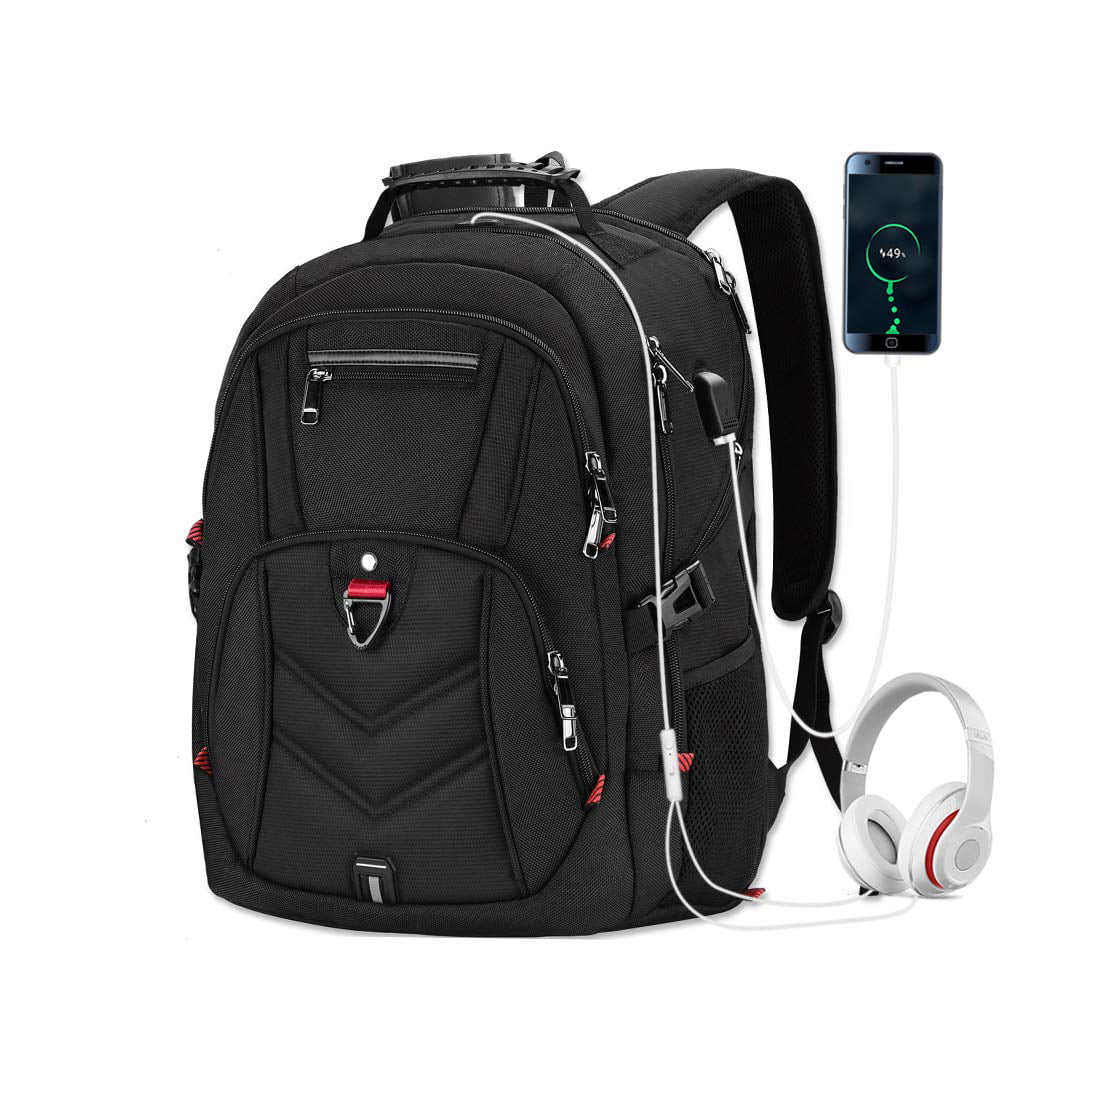 Fireworks Laptop Backpack 17 Inch Business Travel Backpacks for Men Women Fashionable and Durable with USB Charging Port Black Mens and Womens Casual Hiking